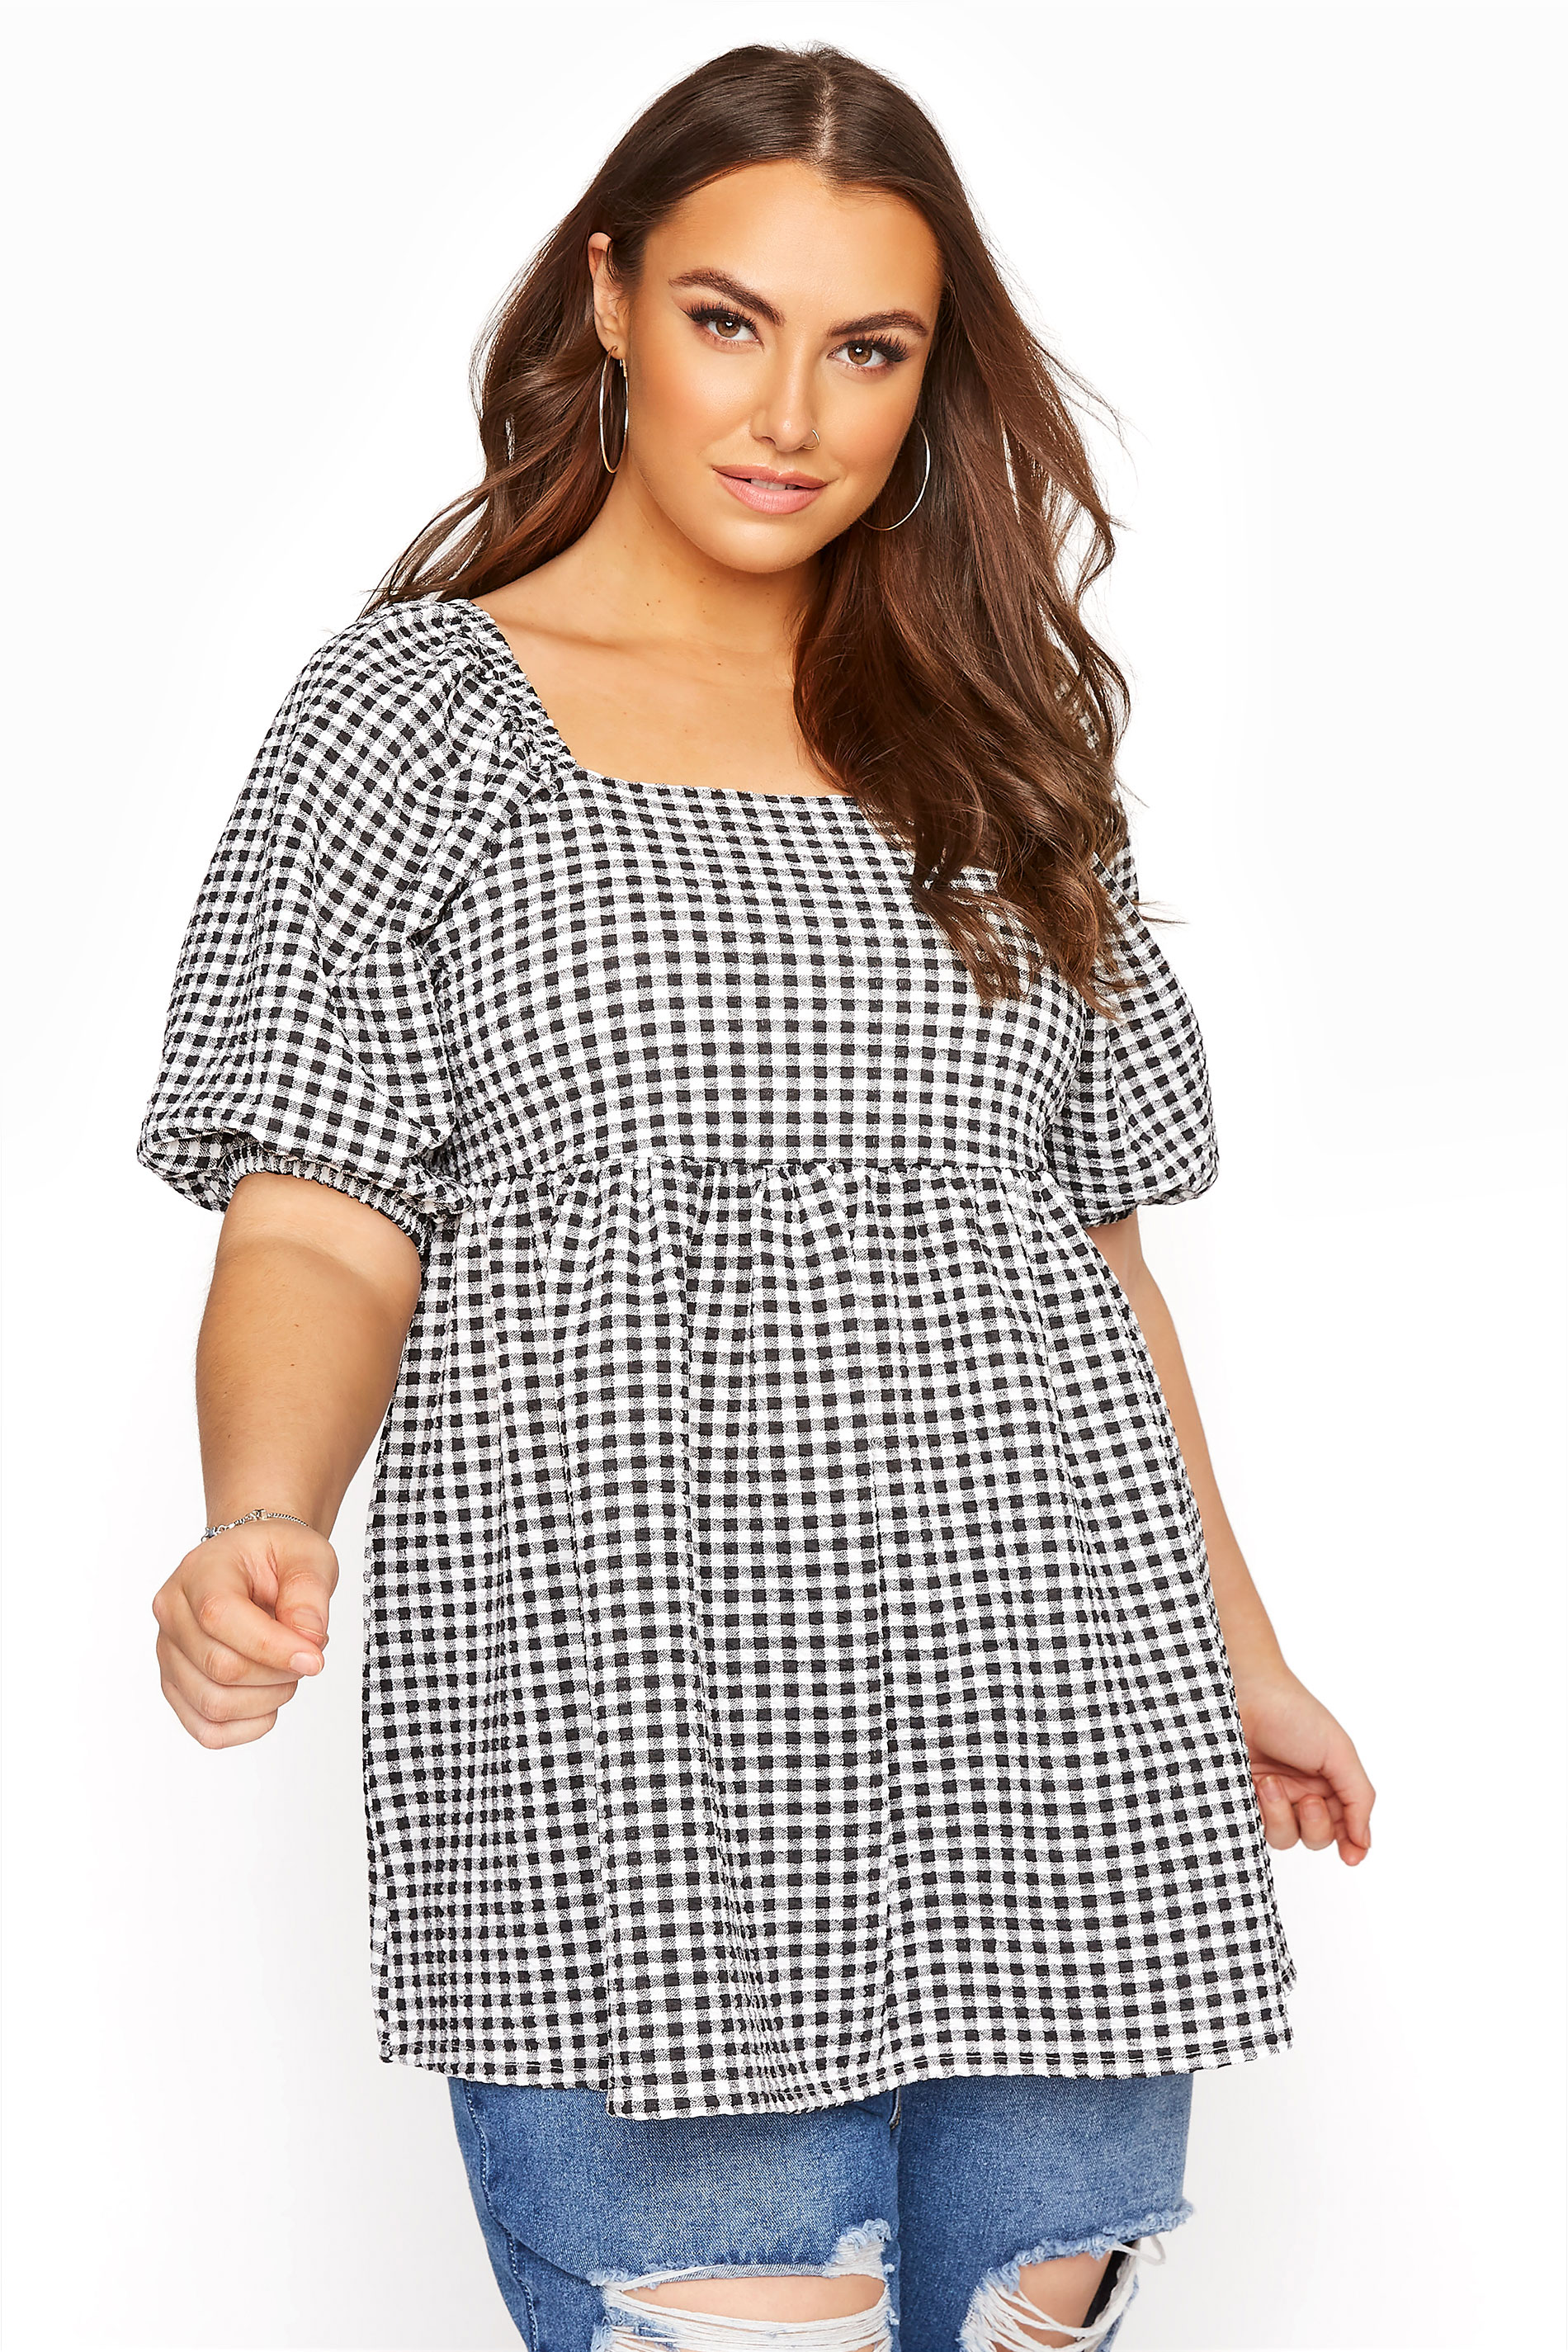 Grande taille  Tops Grande taille  Tops Casual | LIMITED COLLECTION - Top Noir & Blanc à Carreaux Manches Bouffantes - HS79587